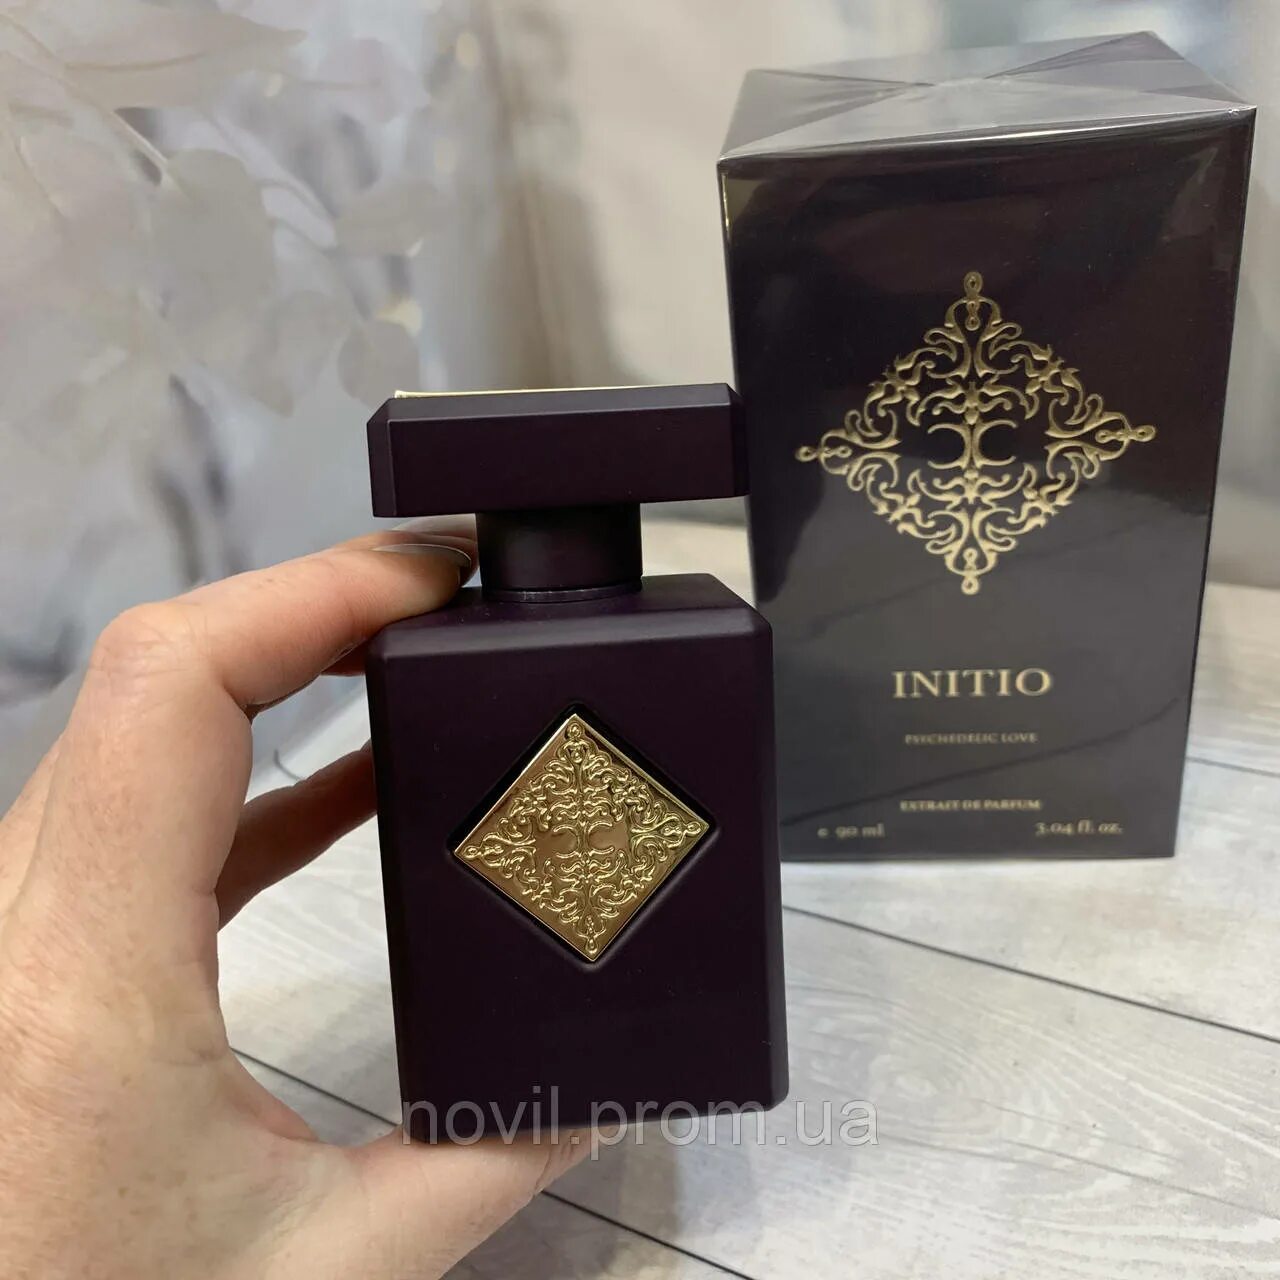 Initio prives psychedelic love. Psychedelic Love Initio Parfums prives. Парфюм Initio Psychedelic Love. Духи Psychedelic Love Initio Parfums prives. Initio Parfums prives oud for Greatness, 90 ml.